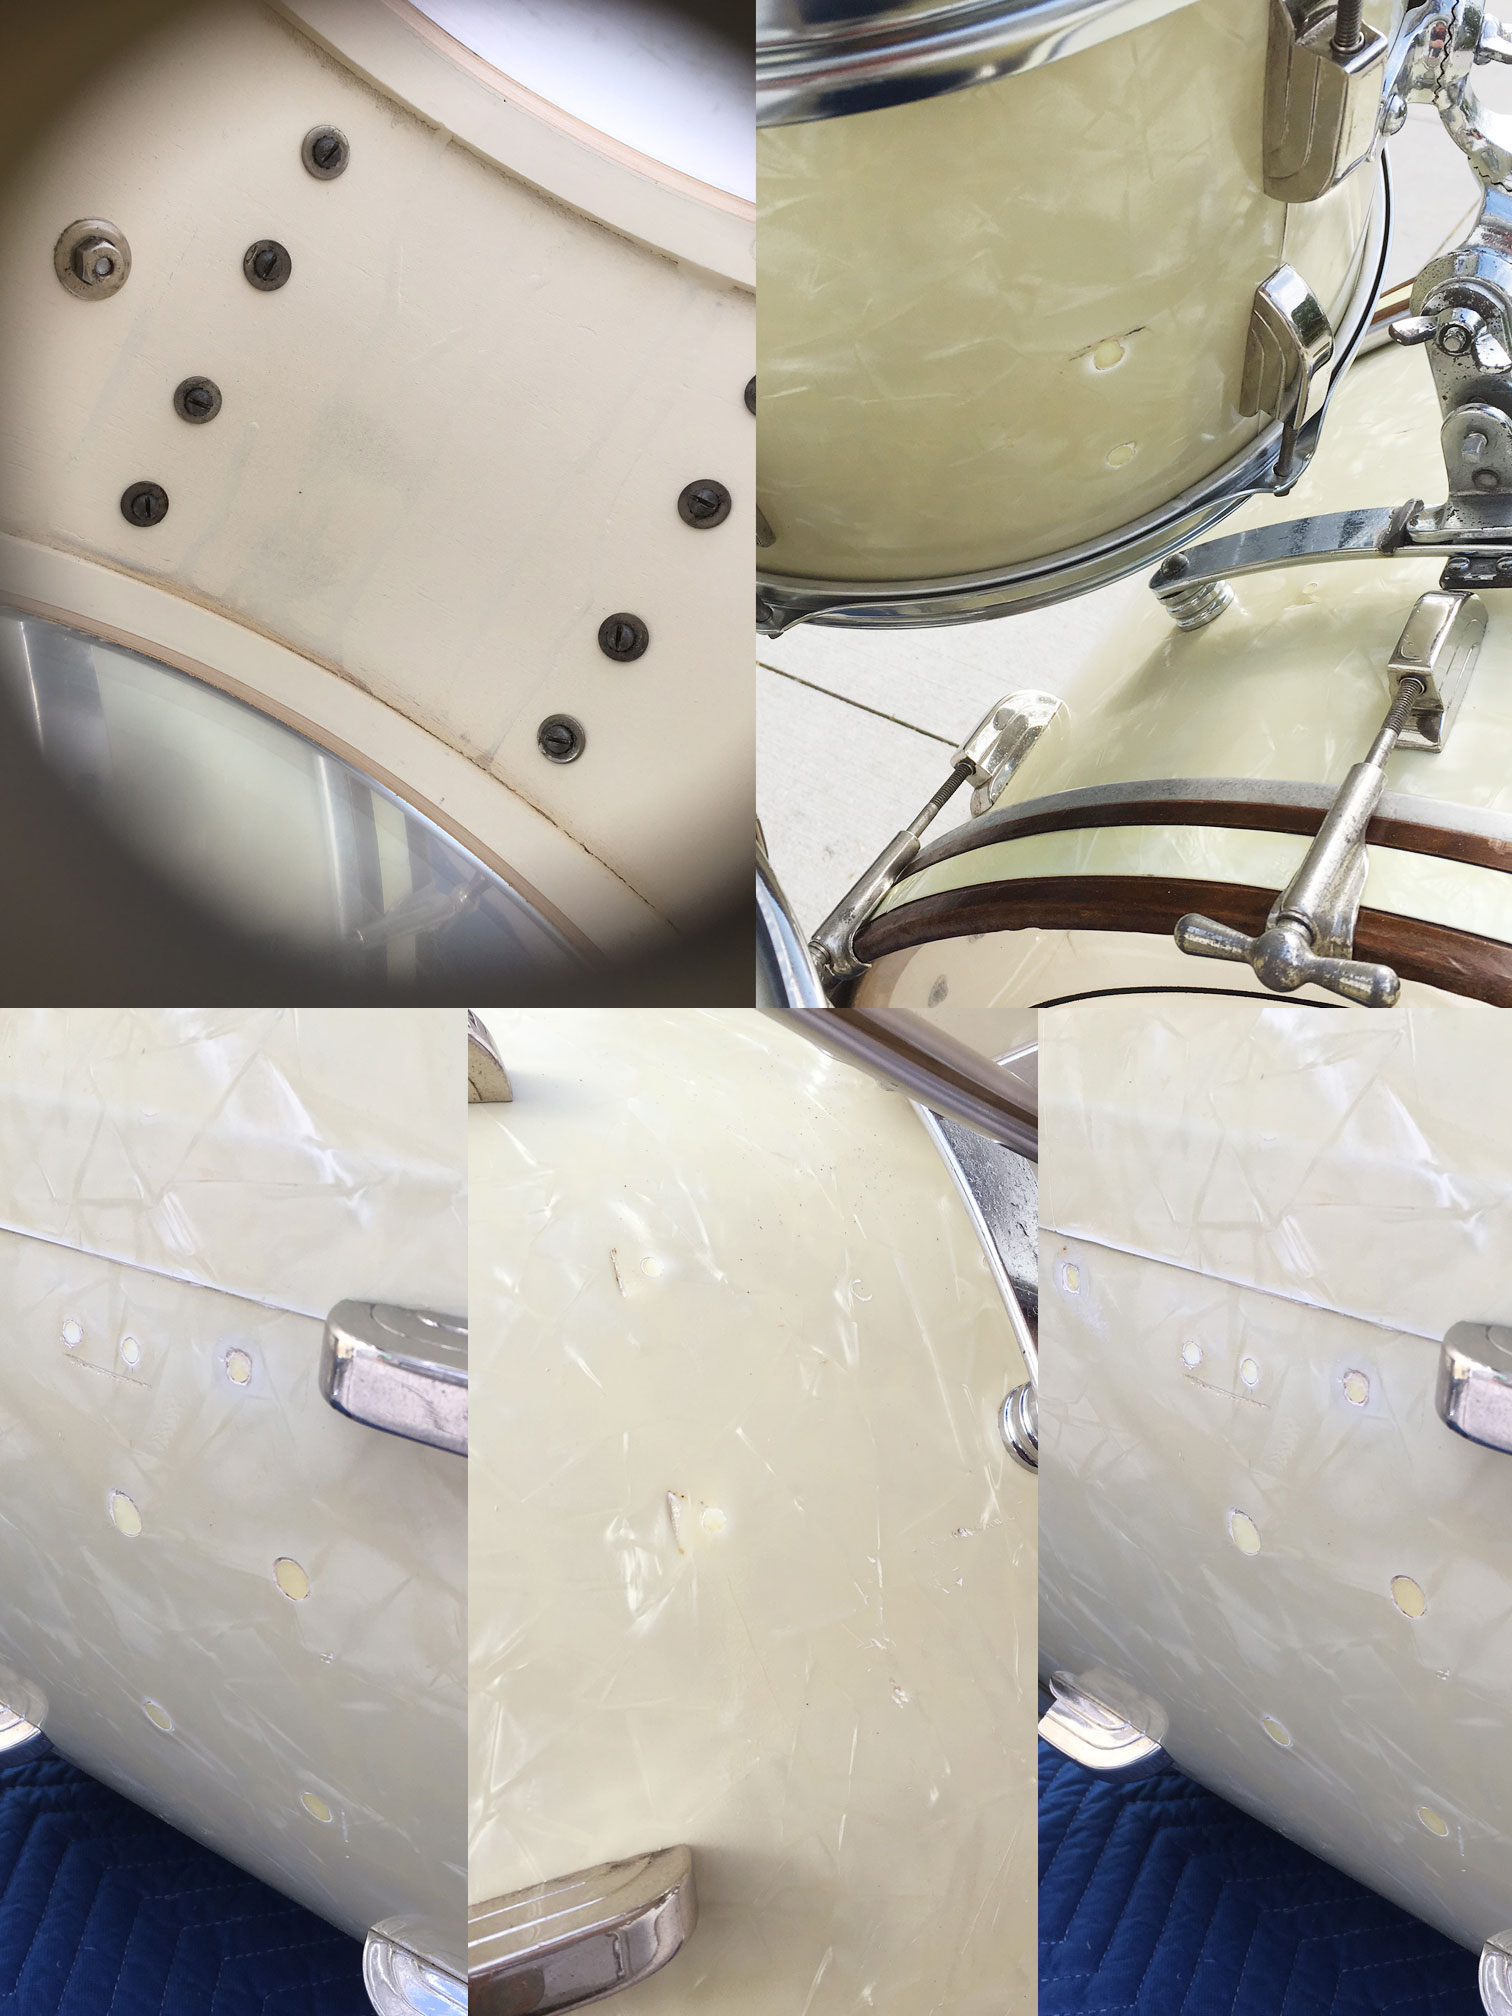 Vintage Early 1950s Leedy & Ludwig 13/16/24 with 14 Snare in White Marine Pearl